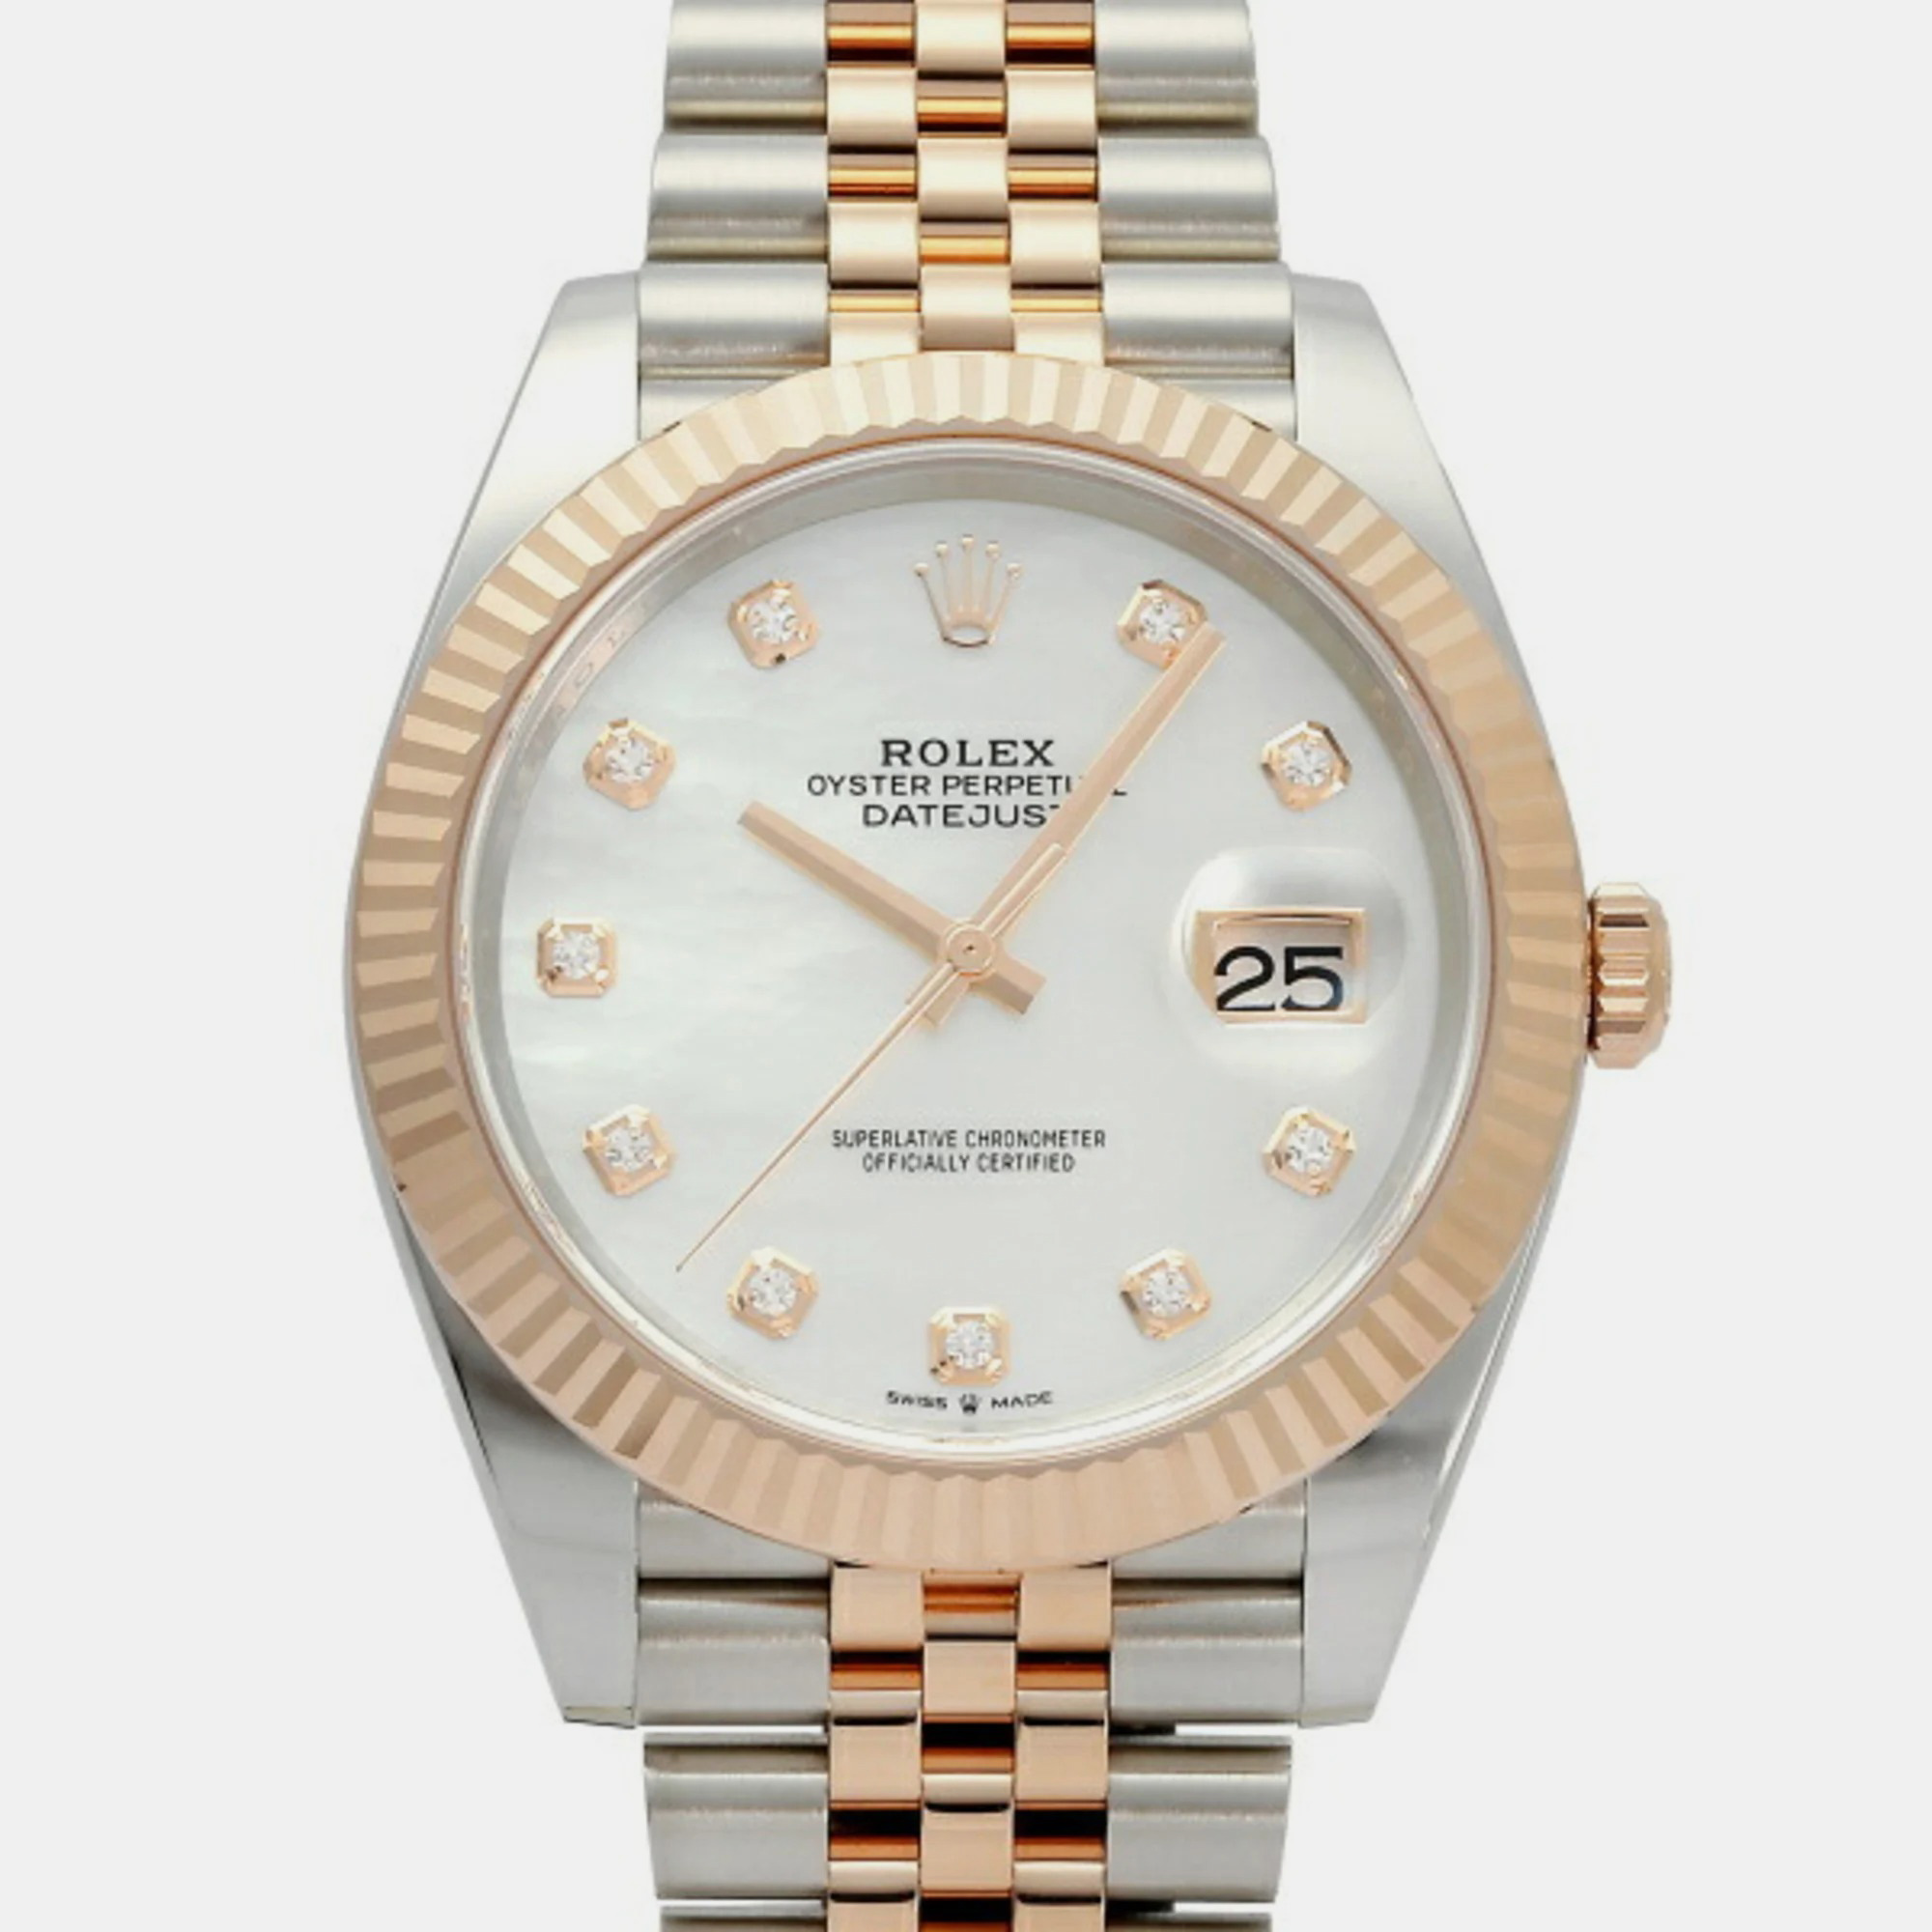 Rolex white 18k rose gold stainless steel diamond datejust 126331 automatic men's wristwatch 41 mm